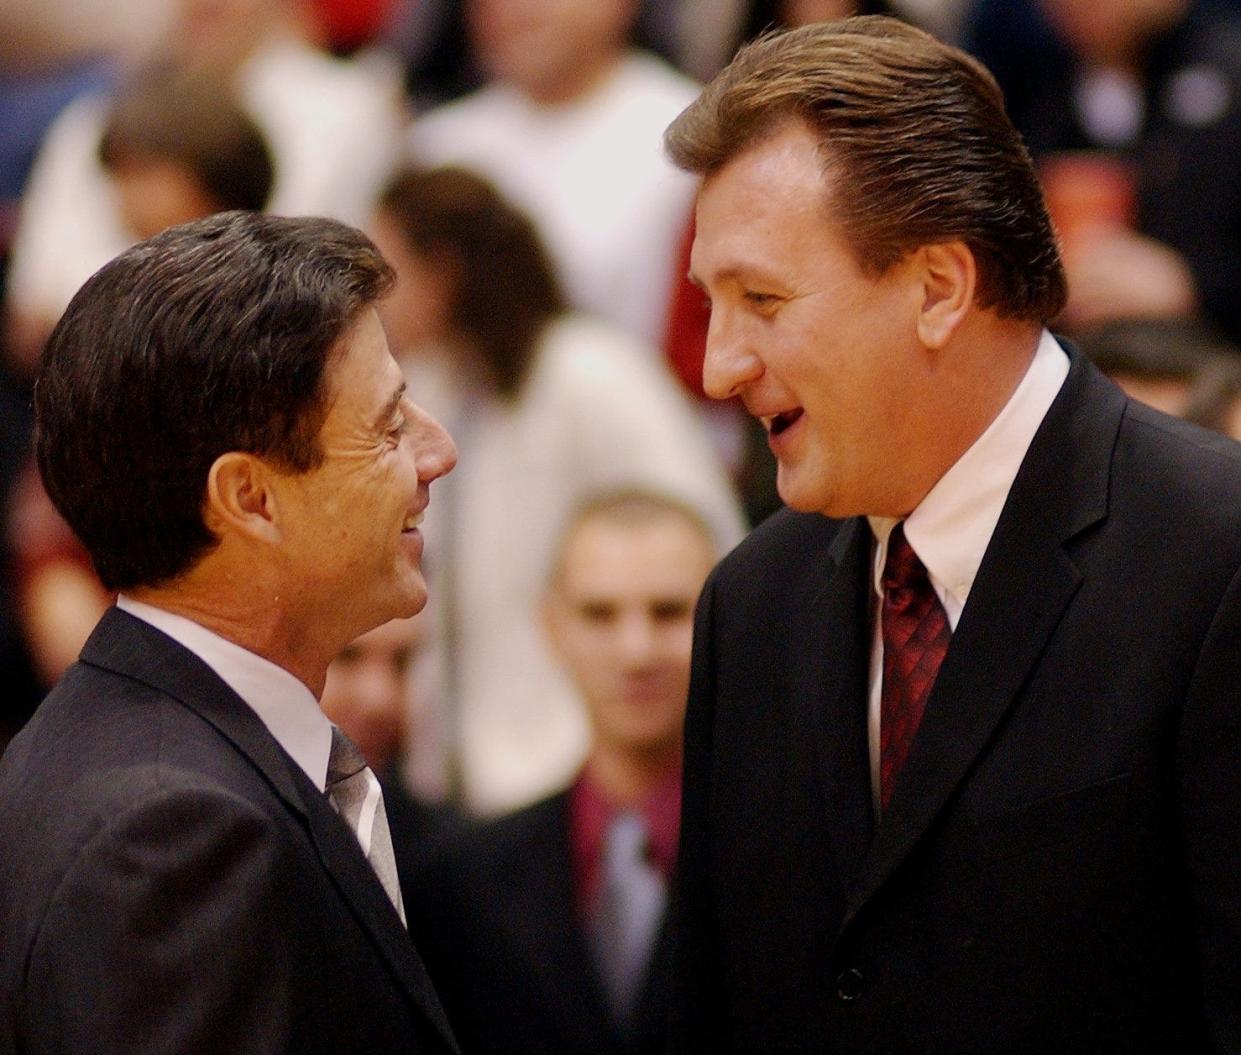 Louisville Cardinals head coach Rick Pitino talks with UC head coach Bob Huggins before the start of their game inside of the Shoemaker Center on Jan 19, 2002.